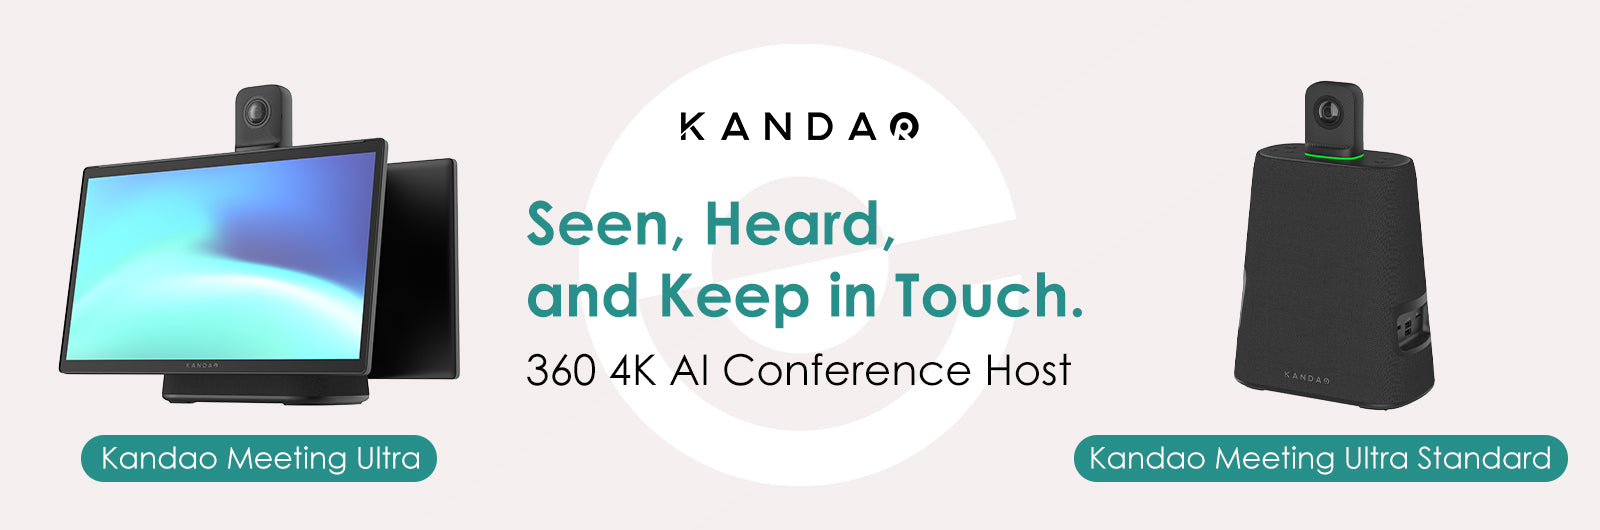 Kandao Technology to Showcase Cutting-Edge Meeting Ultra and Host Exclusive Training Session at InfoComm 2023